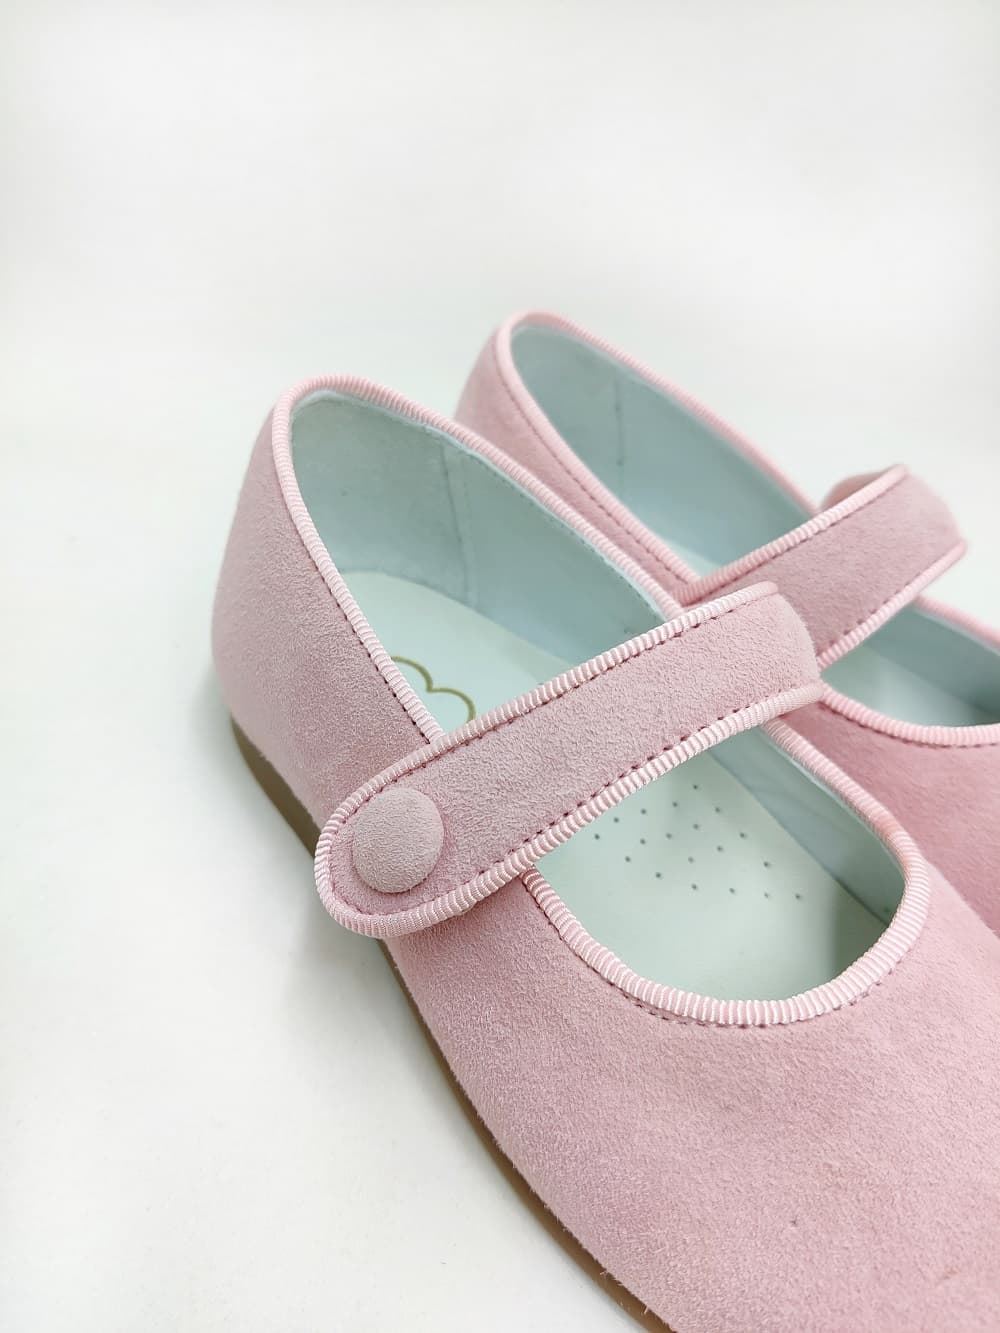 Pirufin (Piruflex) Mary Janes for baby girls in Pink suede - Image 4